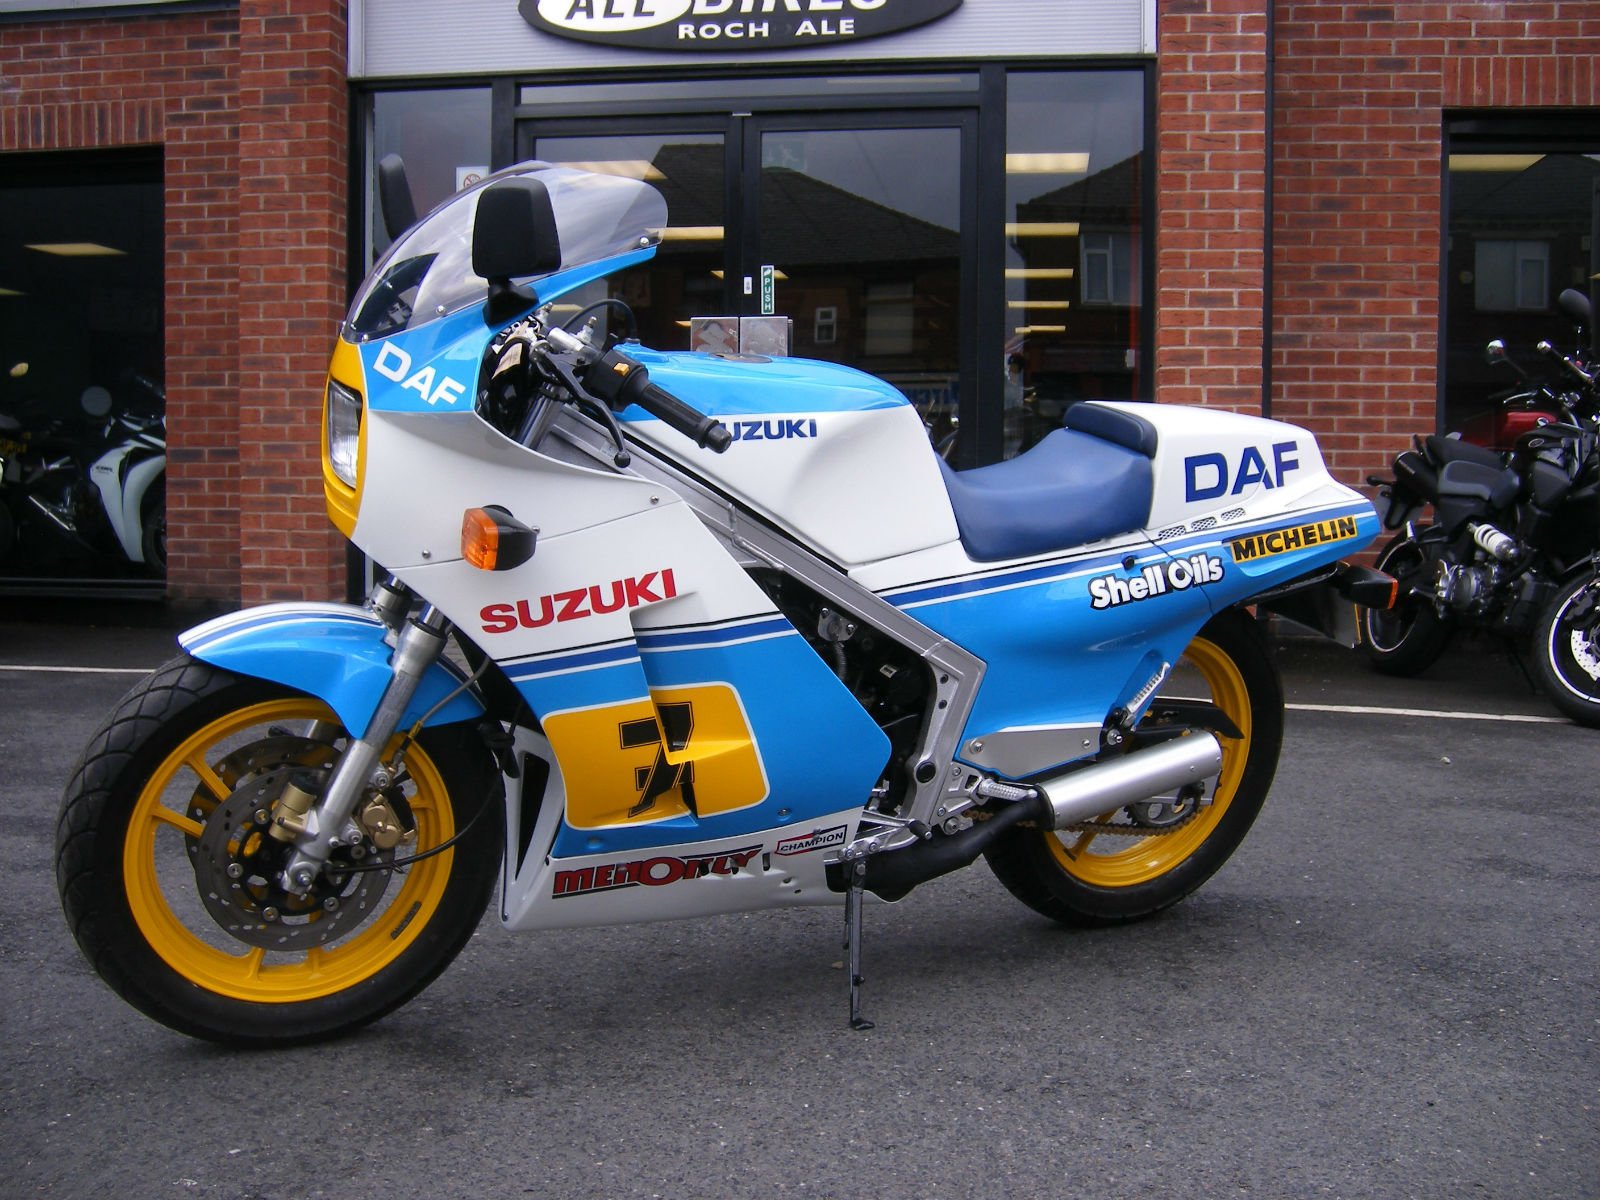 RG500 Archives - Rare SportBikes For Sale